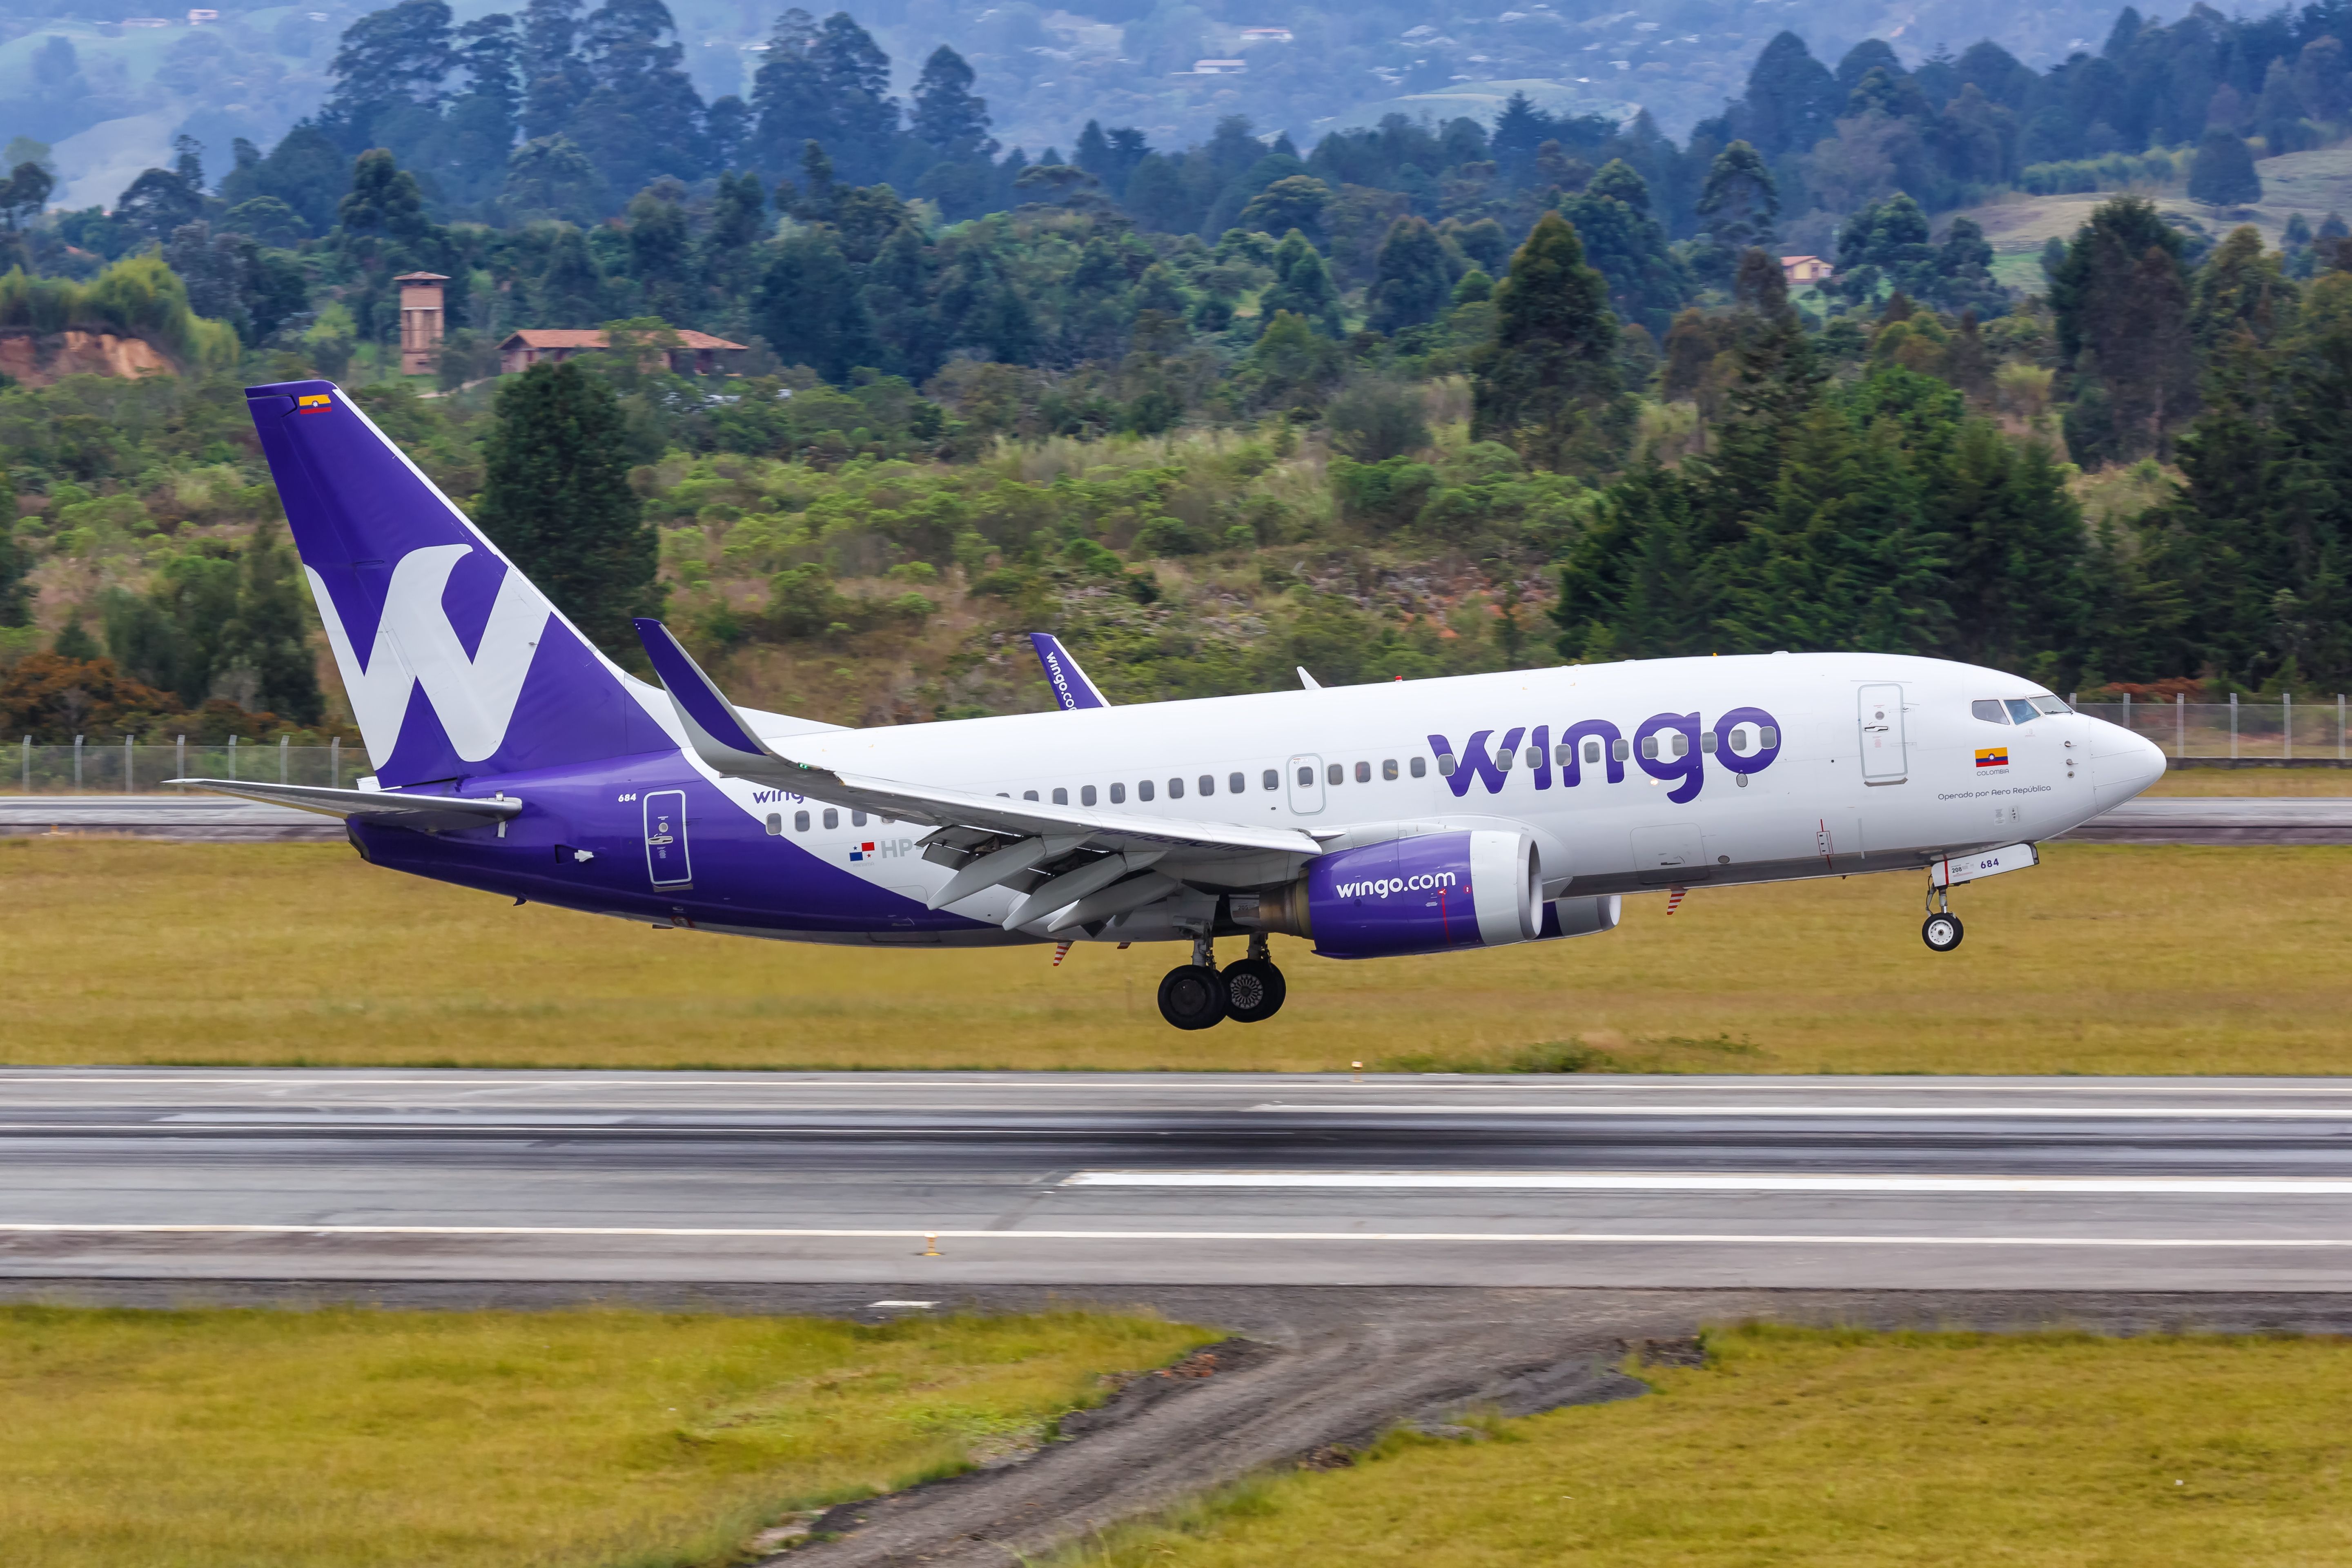 A Wingo Boeing 737-800 aircraft